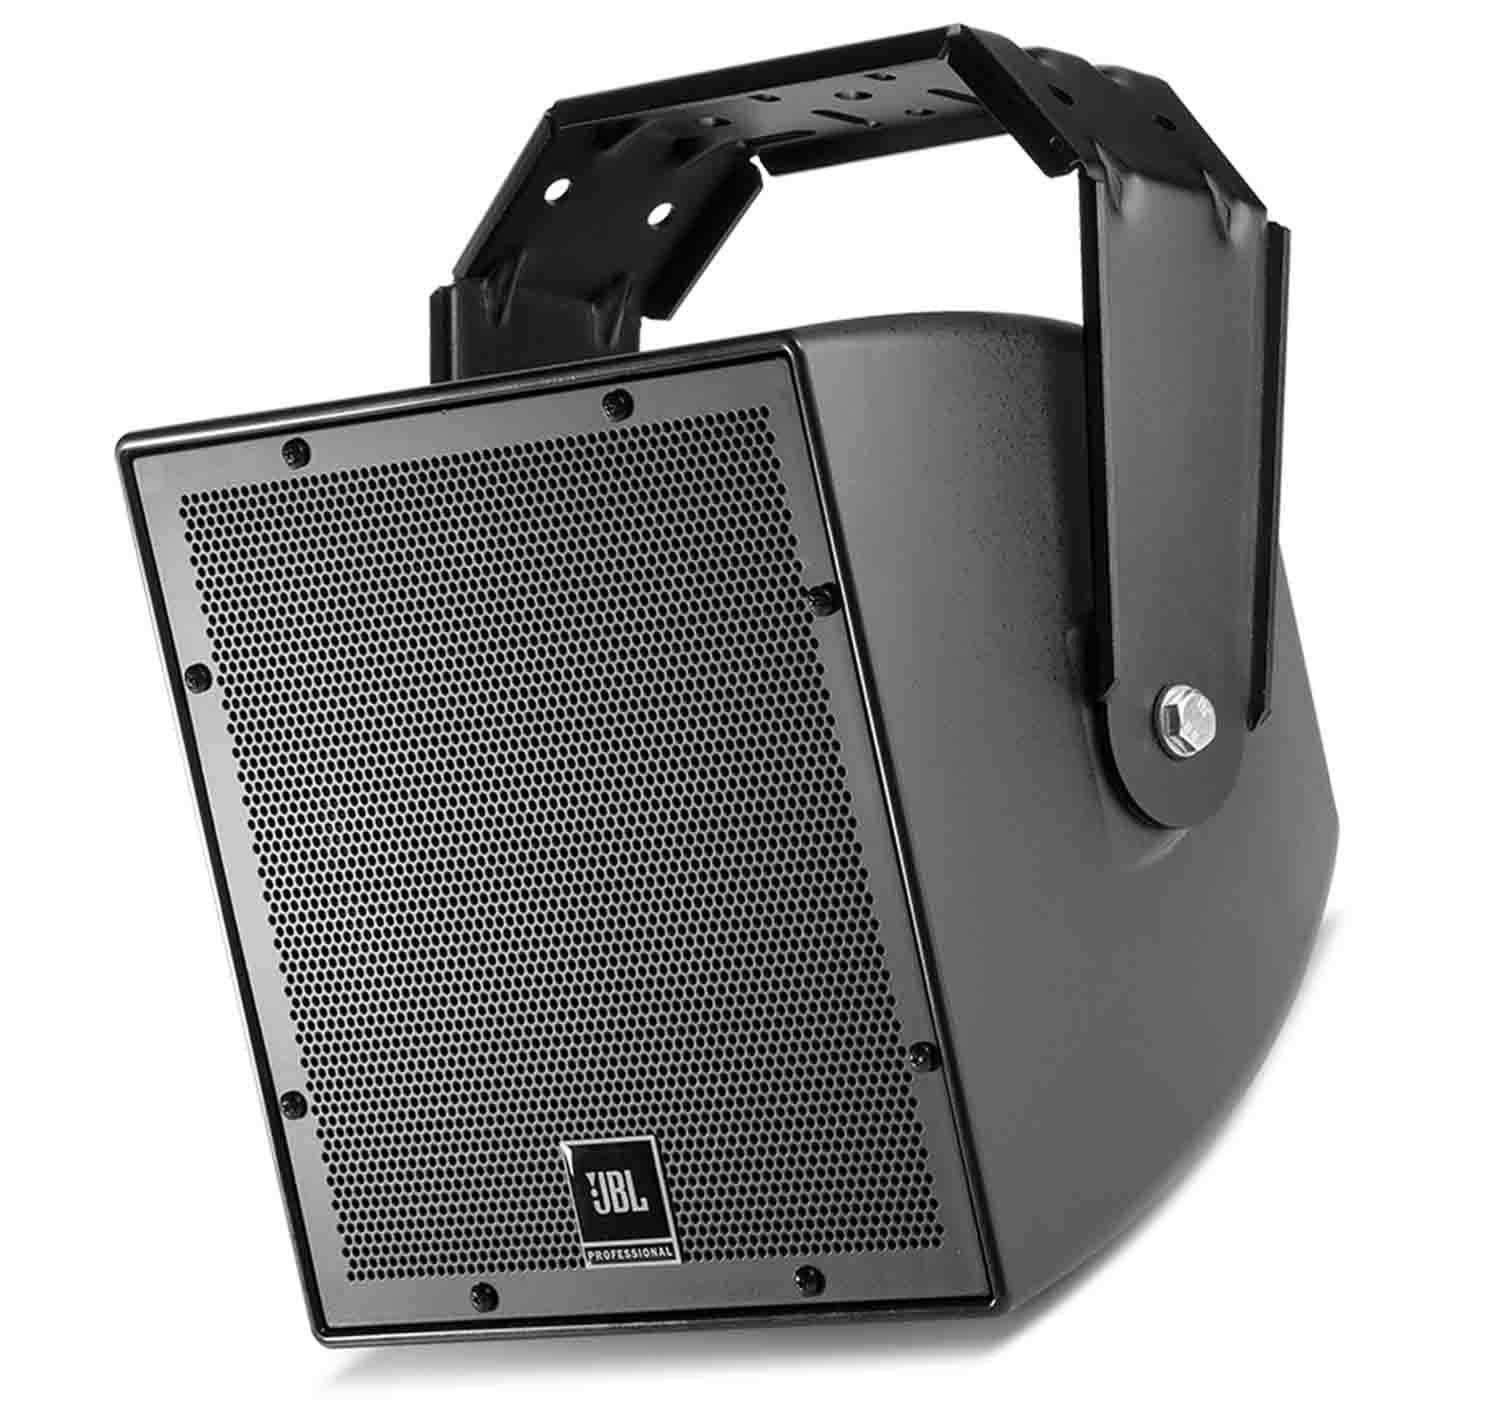 JBL AWC82-BK All-Weather Compact 2-Way Coaxial Loudspeaker with 8" LF - Black - Hollywood DJ